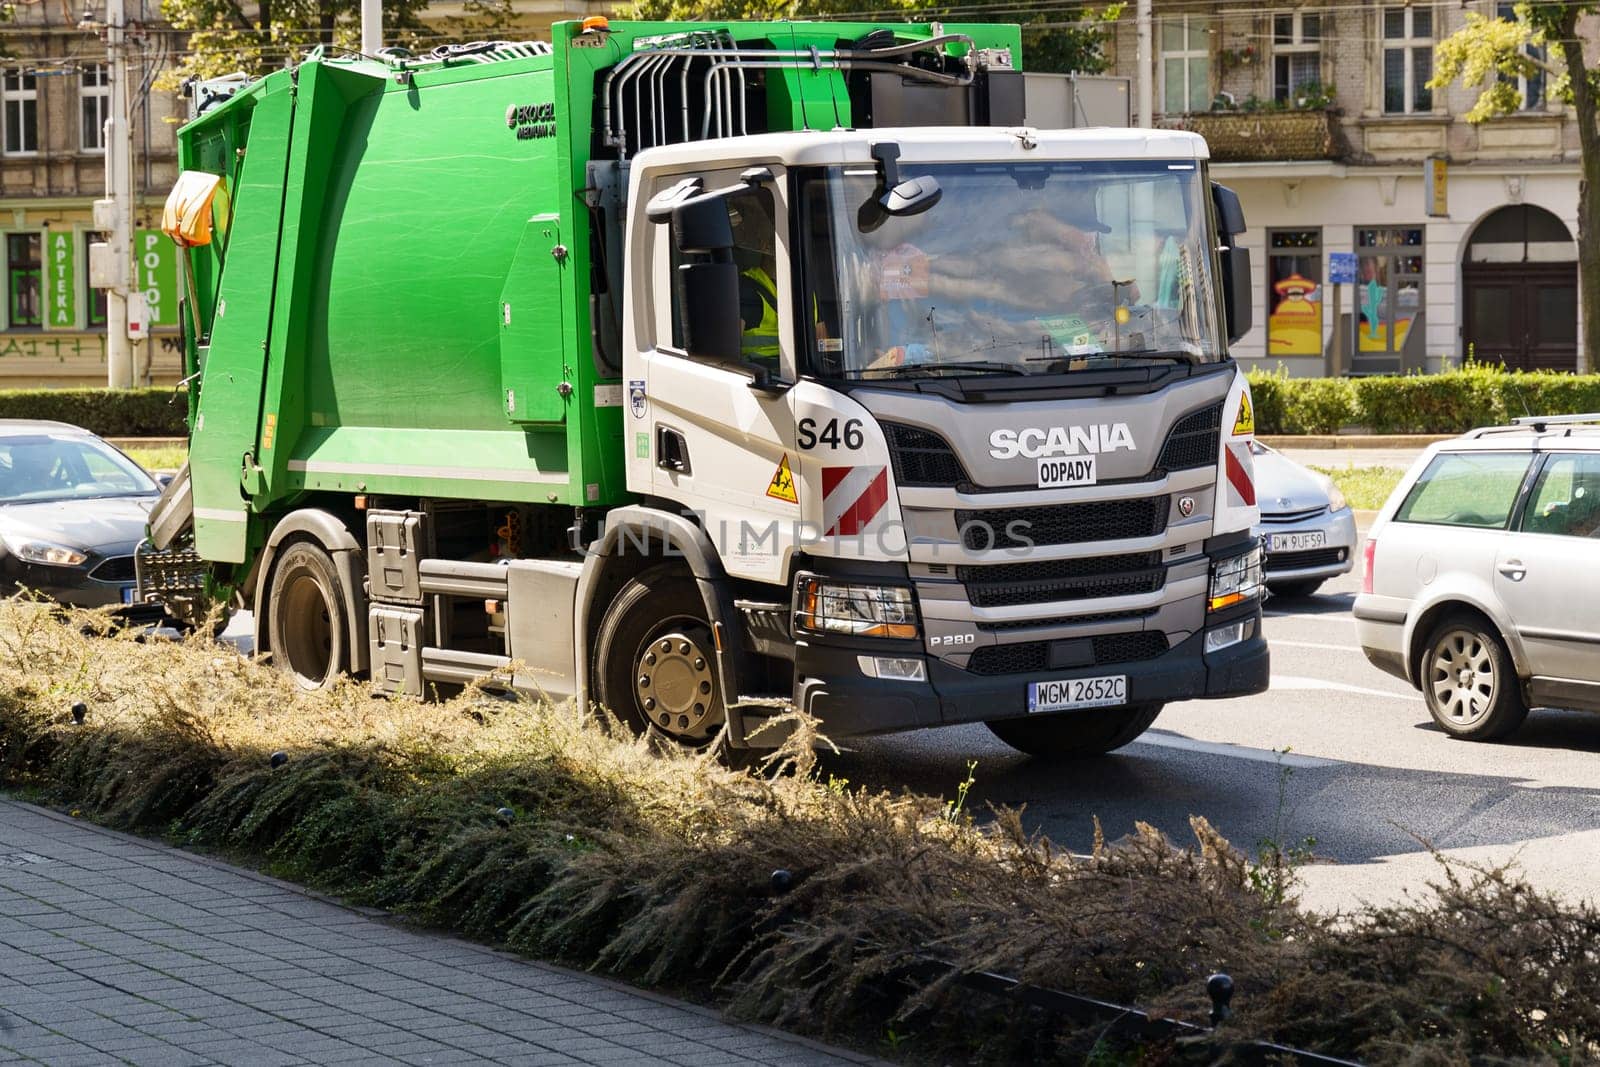 Waste Removal Truck Operates in Busy Urban Street During Daytime by Sd28DimoN_1976